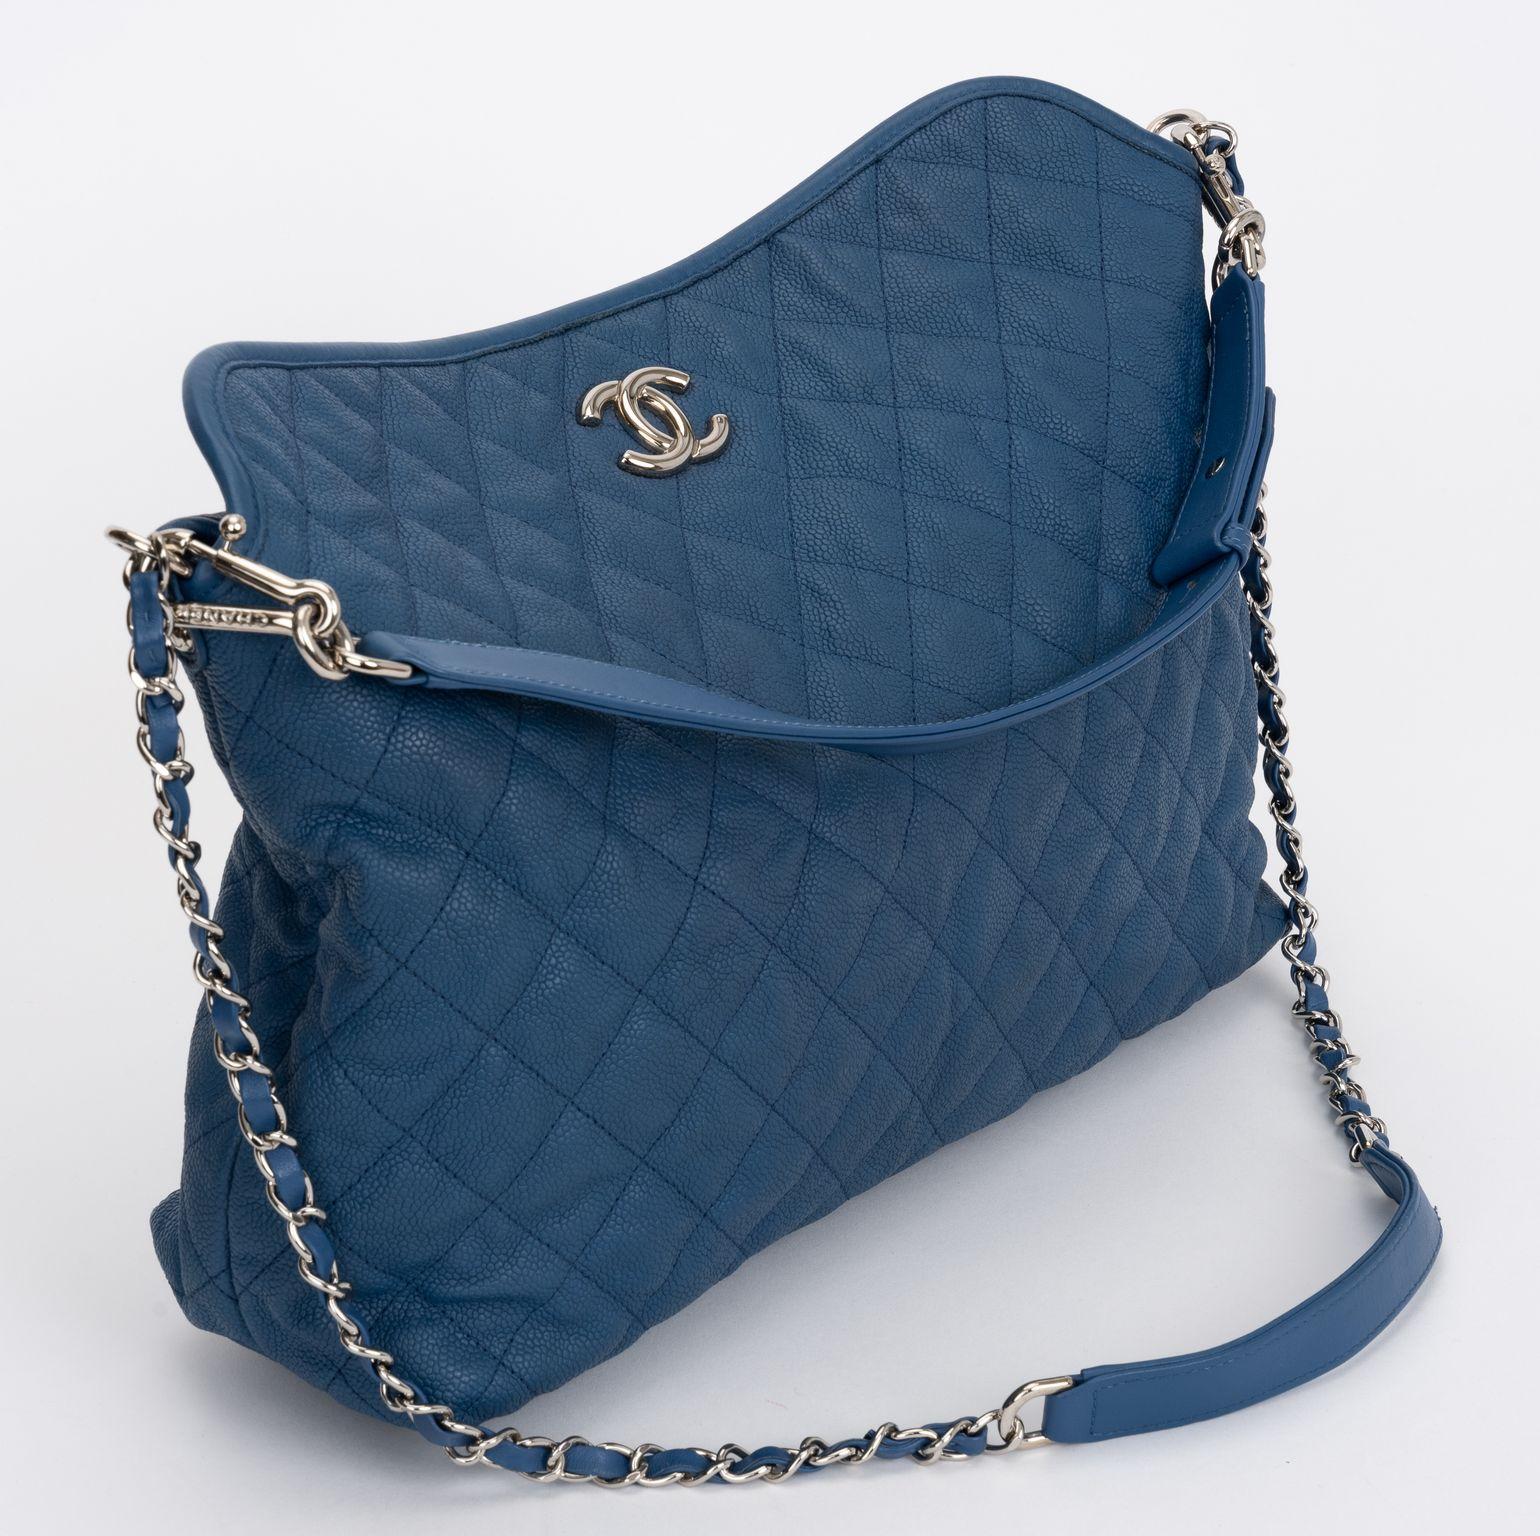 The Chanel Caviar Quilted Hobo in denim Blue leather features silver chain link shoulder strap threaded with leather and a removable shorter strap. Interior has a zipper pocket and a patch pocket. 
Short strap drop 6.5, long shoulder drop 16